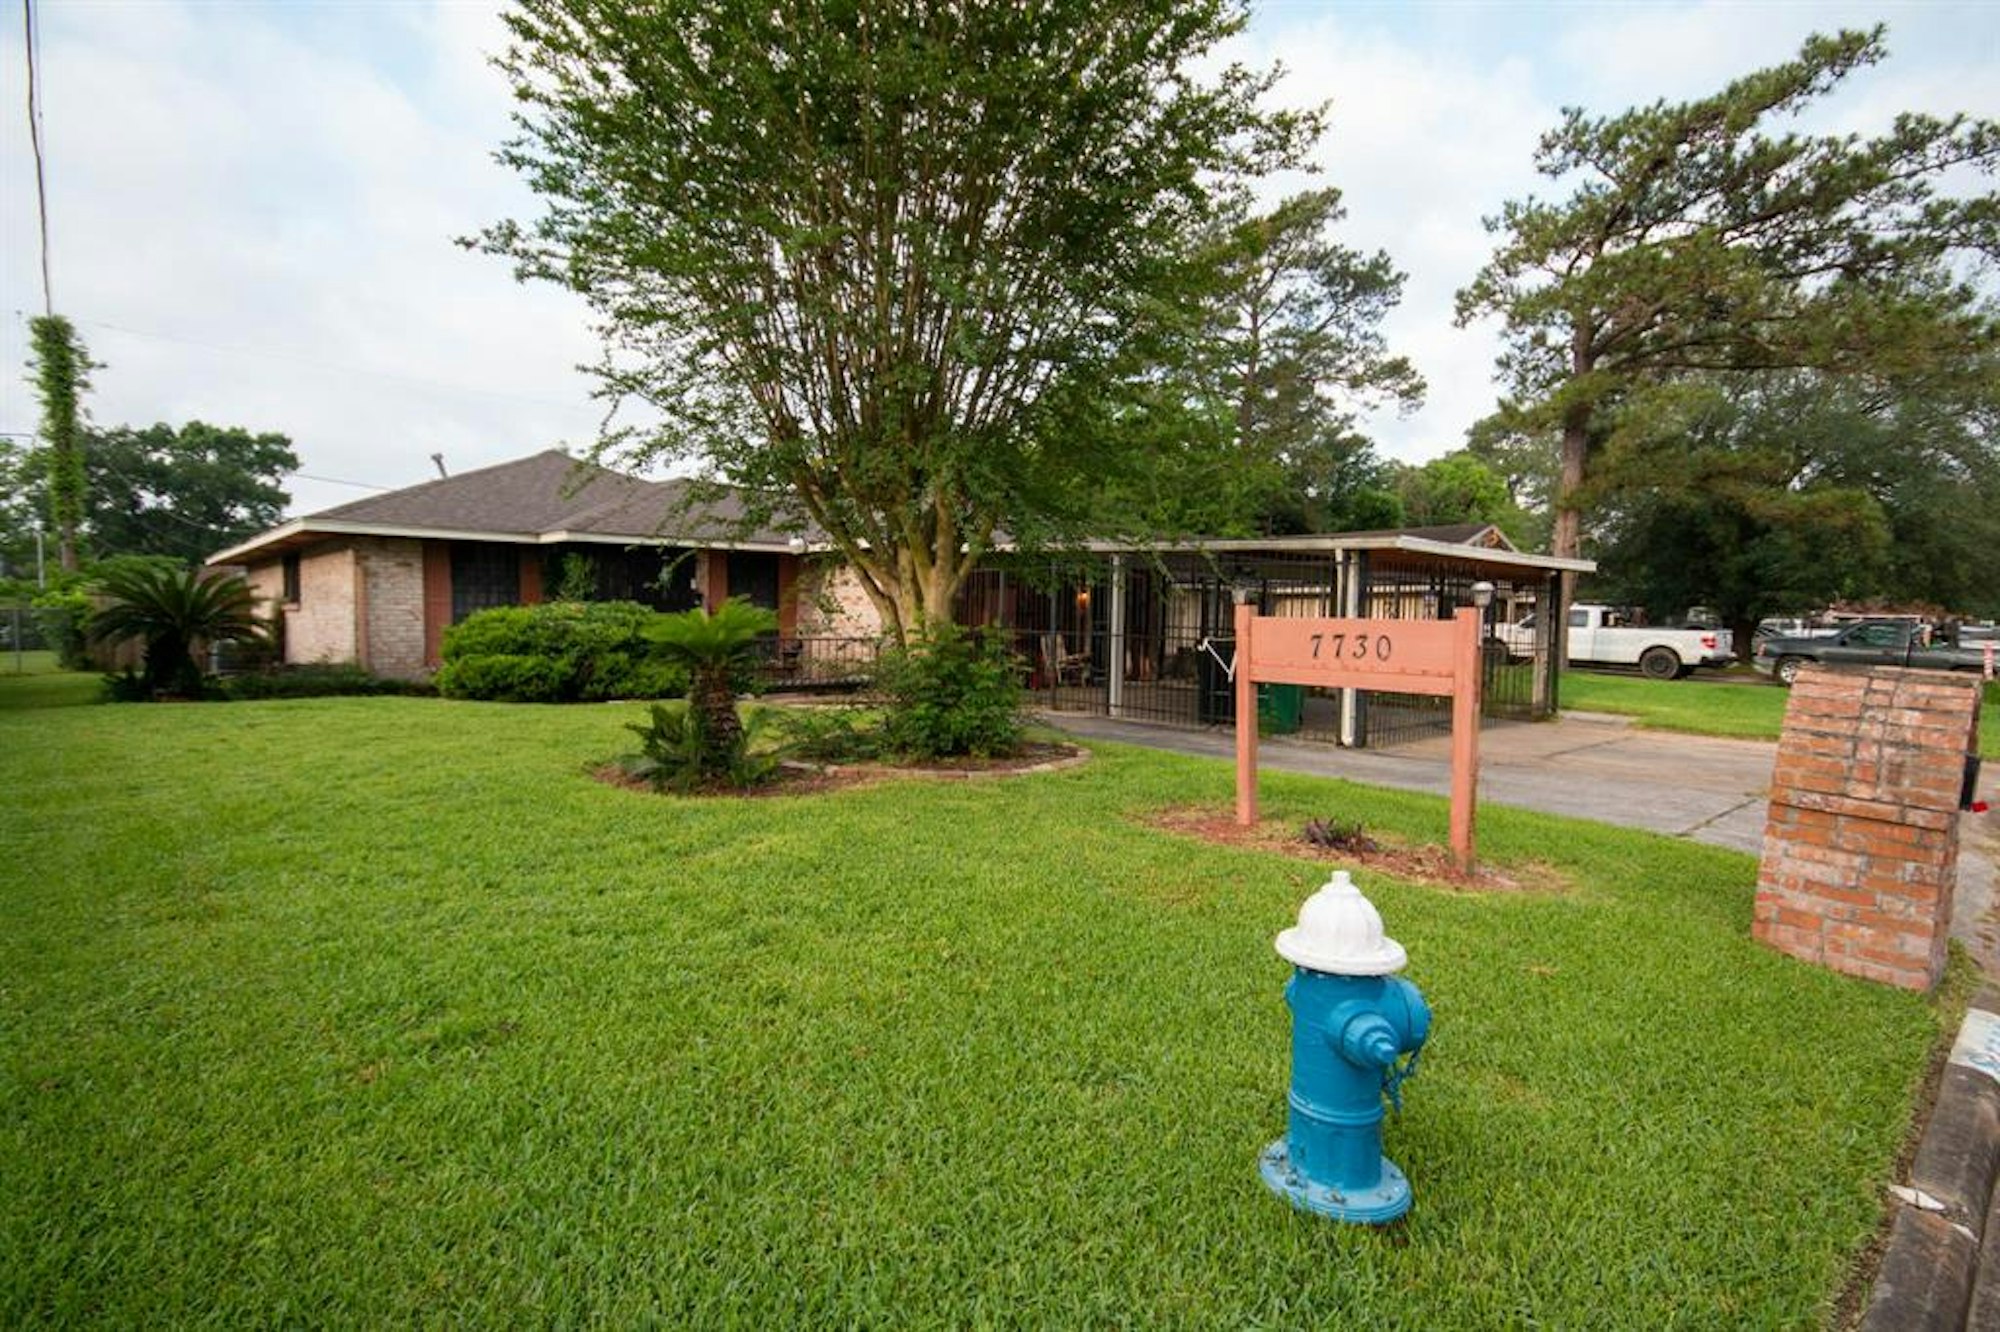 Photo 1 of 16 - 7730 Boggess Rd, Houston, TX 77016